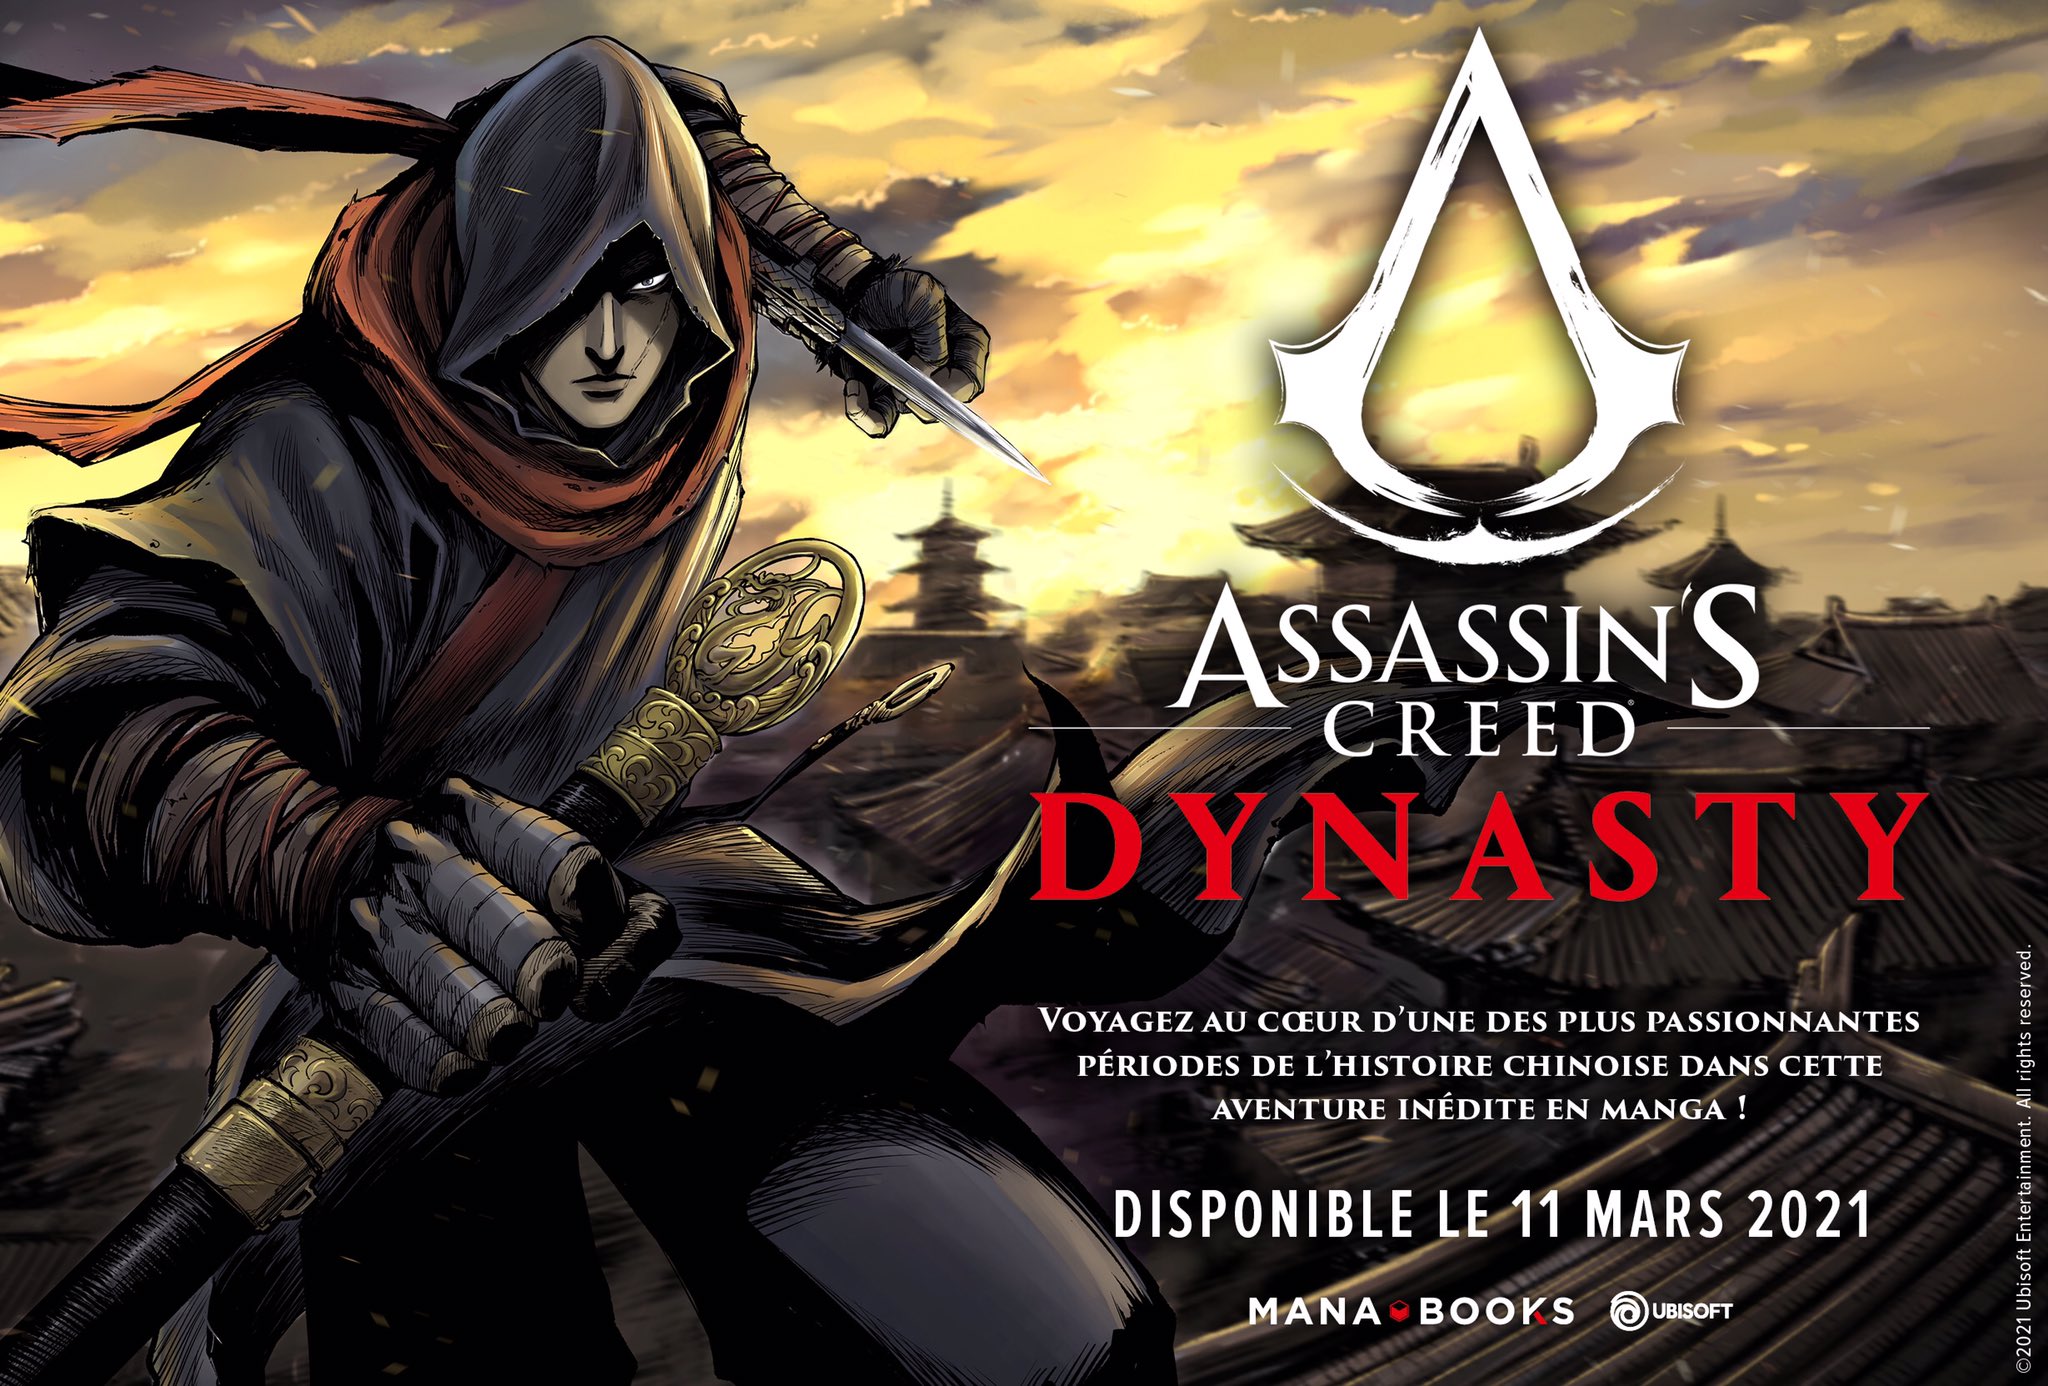 Assassin's Creed Dynasty Annonce